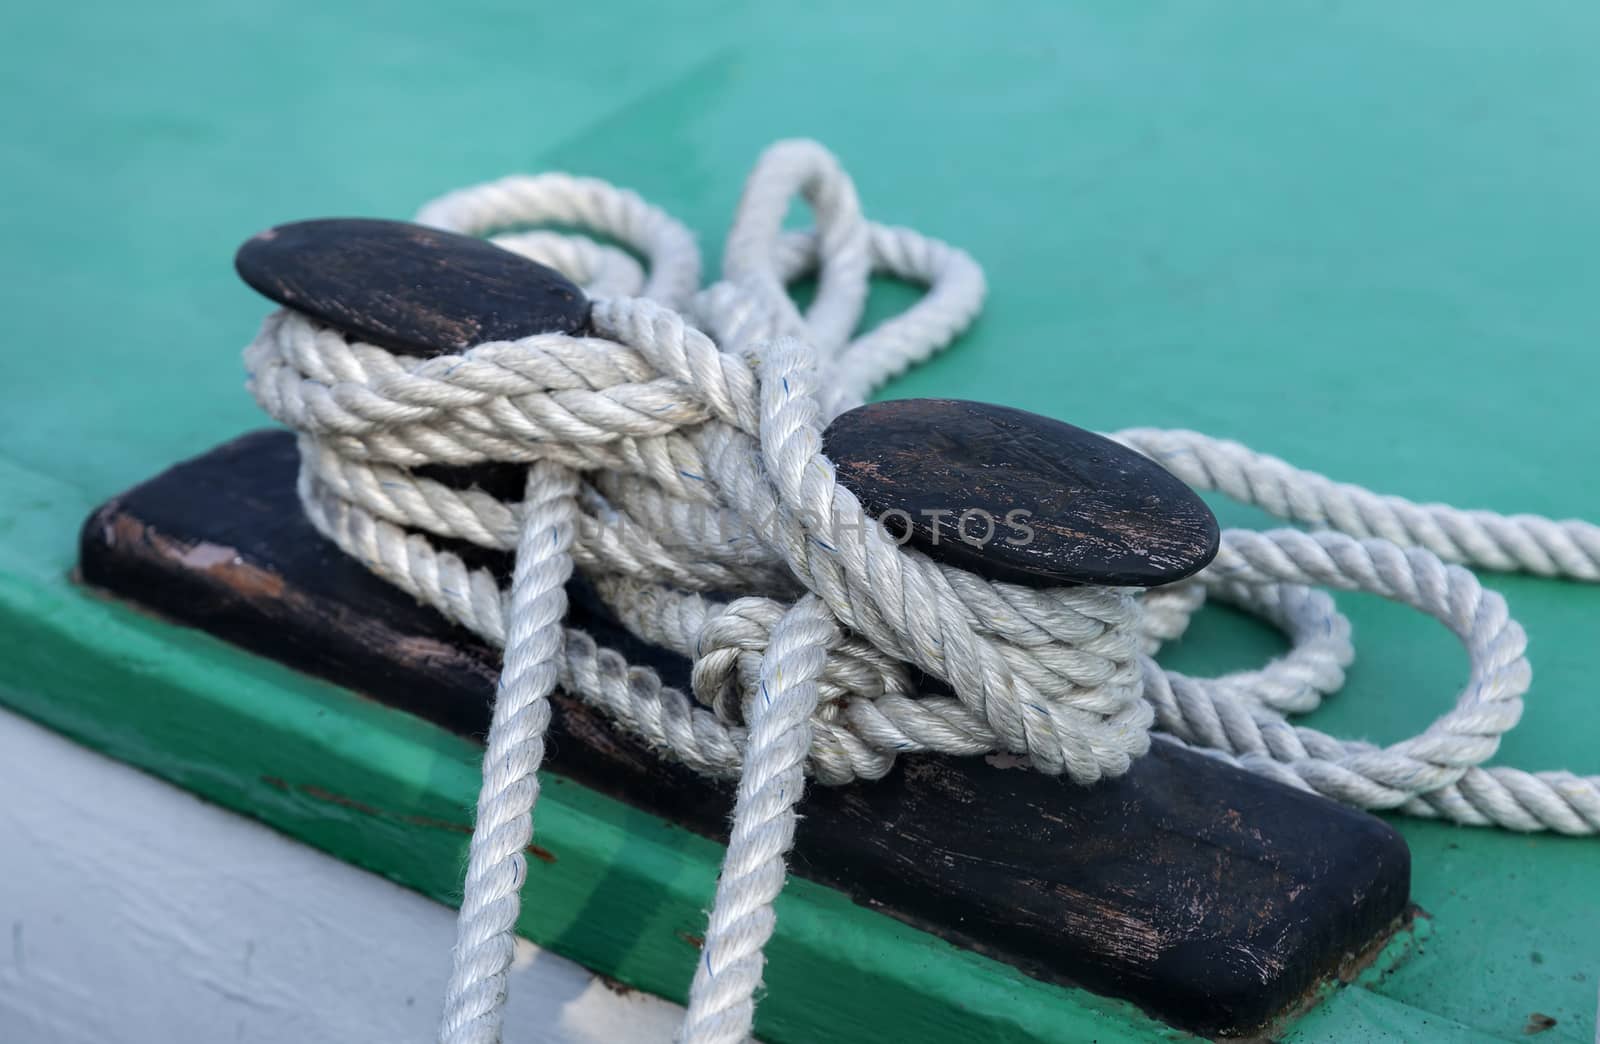 Knots and ropes on a moored ship in harbor